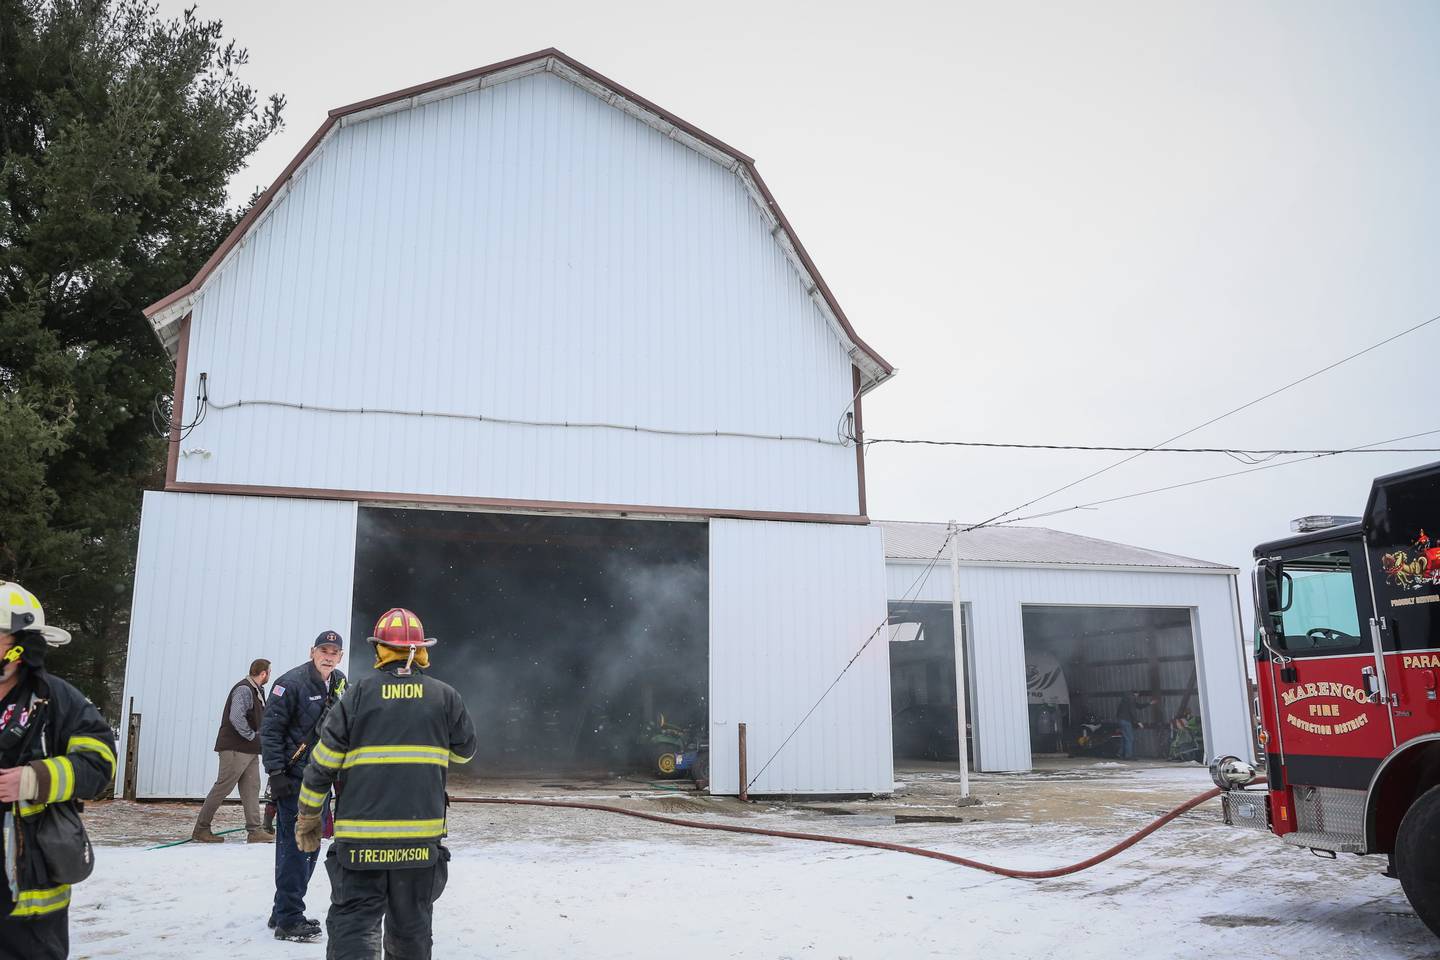 The Marengo Fire & Rescue Districts responded at 9:43 a.m. Monday, Jan. 17, 2022, to the 3400 block of Vermont Road in unincorporated Woodstock for a barn fire, according to a news release.